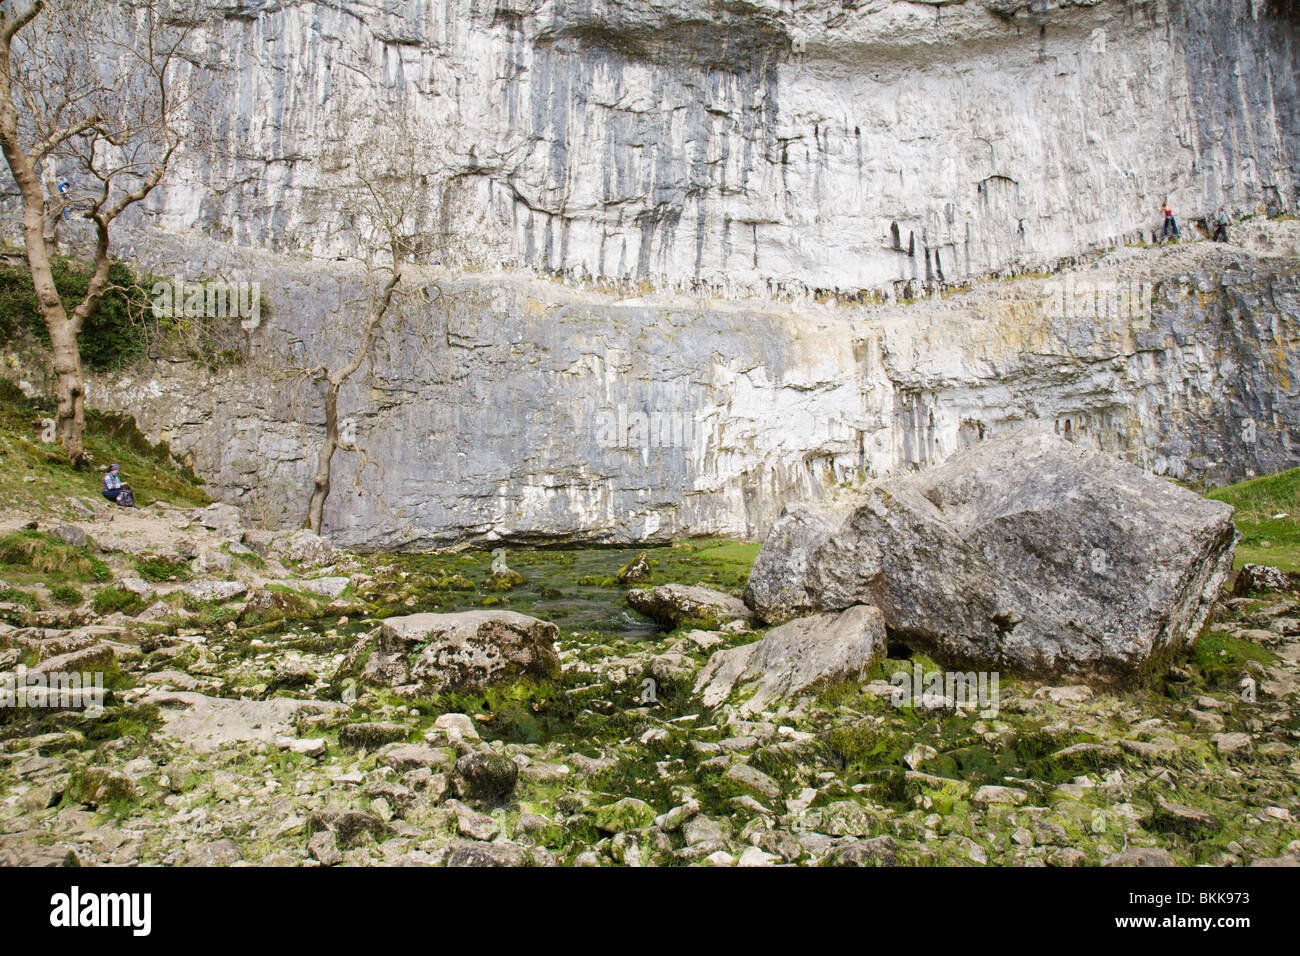 The base of the Limestone cliff at 'Malham Cove', Yorkshire Dales, England, UK. Stock Photo